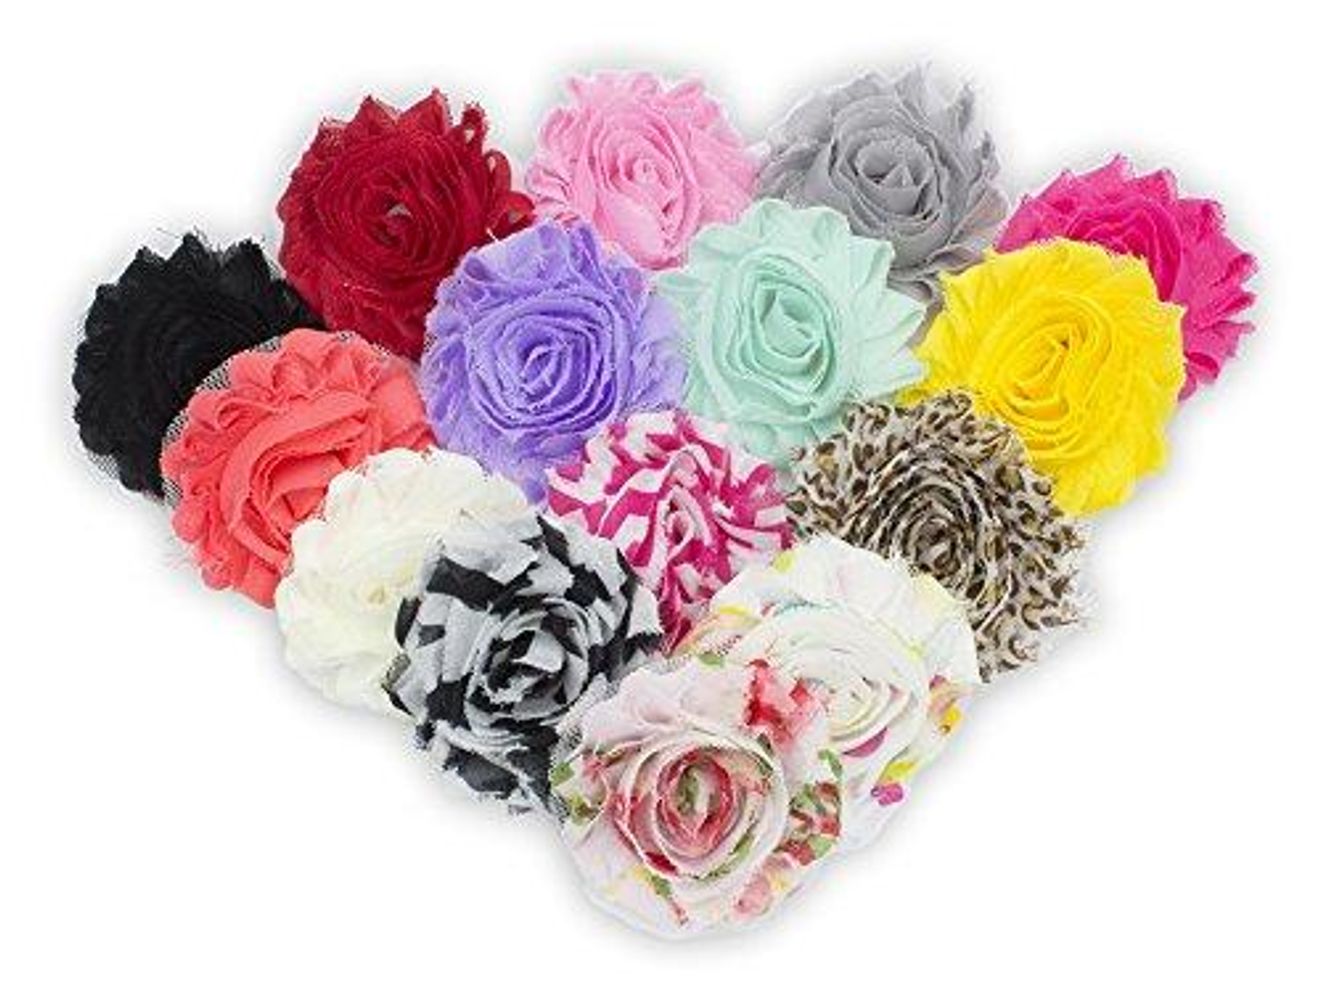 MCHPI Store JLIKA (30 pieces) 15 Pairs Shabby Flowers - Chiffon Fabric Roses - 2.5" - Colors as pictured